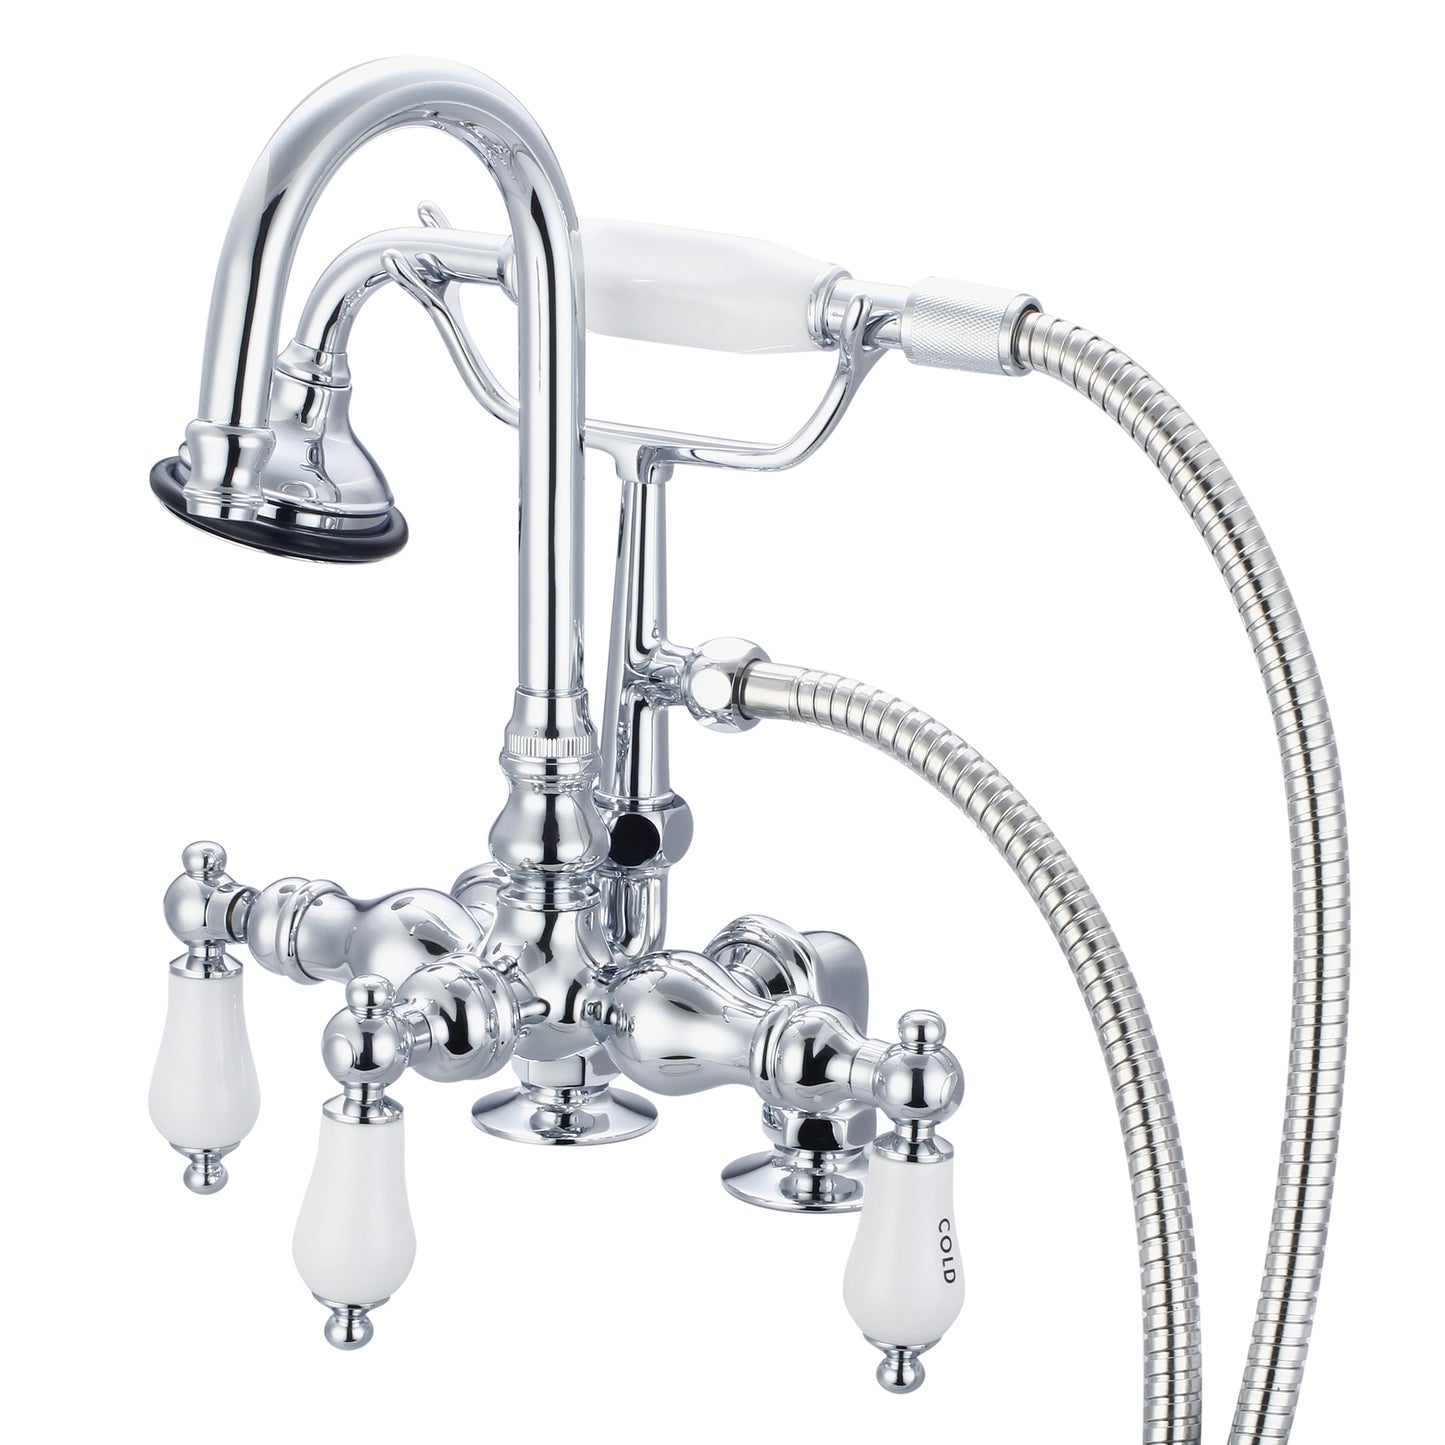 Vintage Classic 3.375" Center Deck Mount Tub Faucet With Gooseneck Spout, 2" Risers & Handheld Shower in Chrome Finish, With Porcelain Lever Handles, Hot And Cold Labels Included